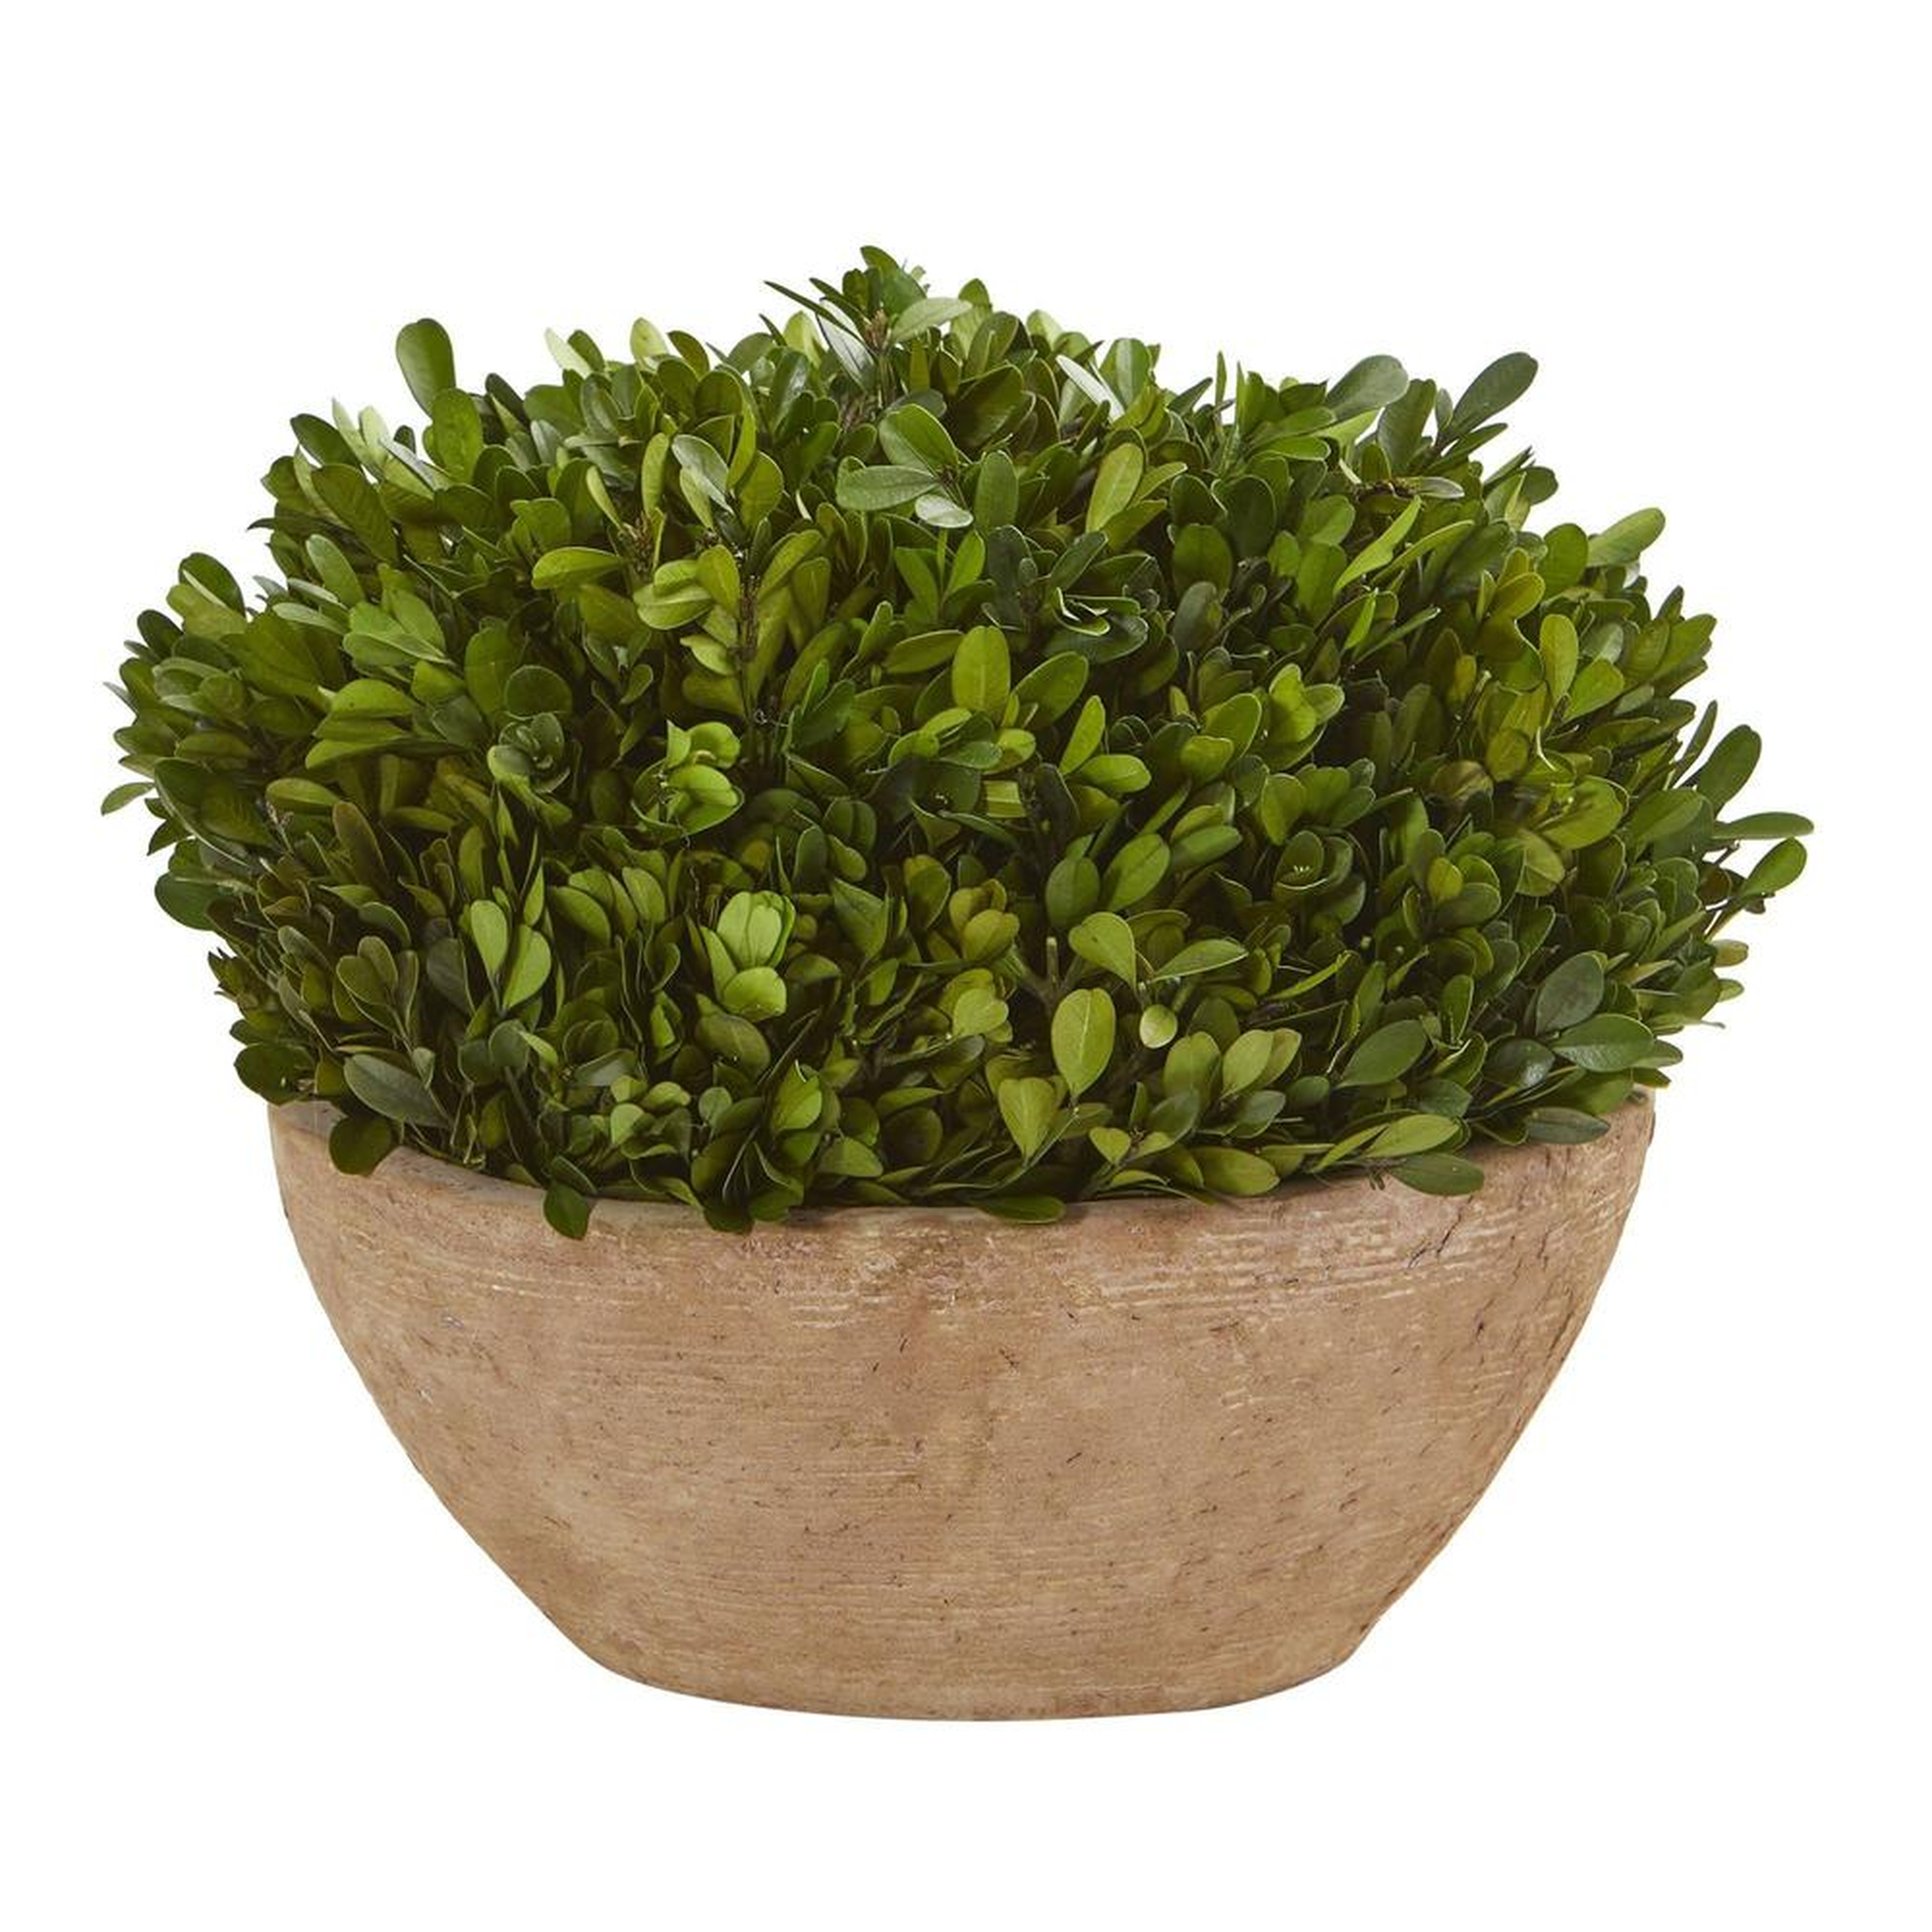 12" boxwood preserved plant in oval planter - Fiddle + Bloom